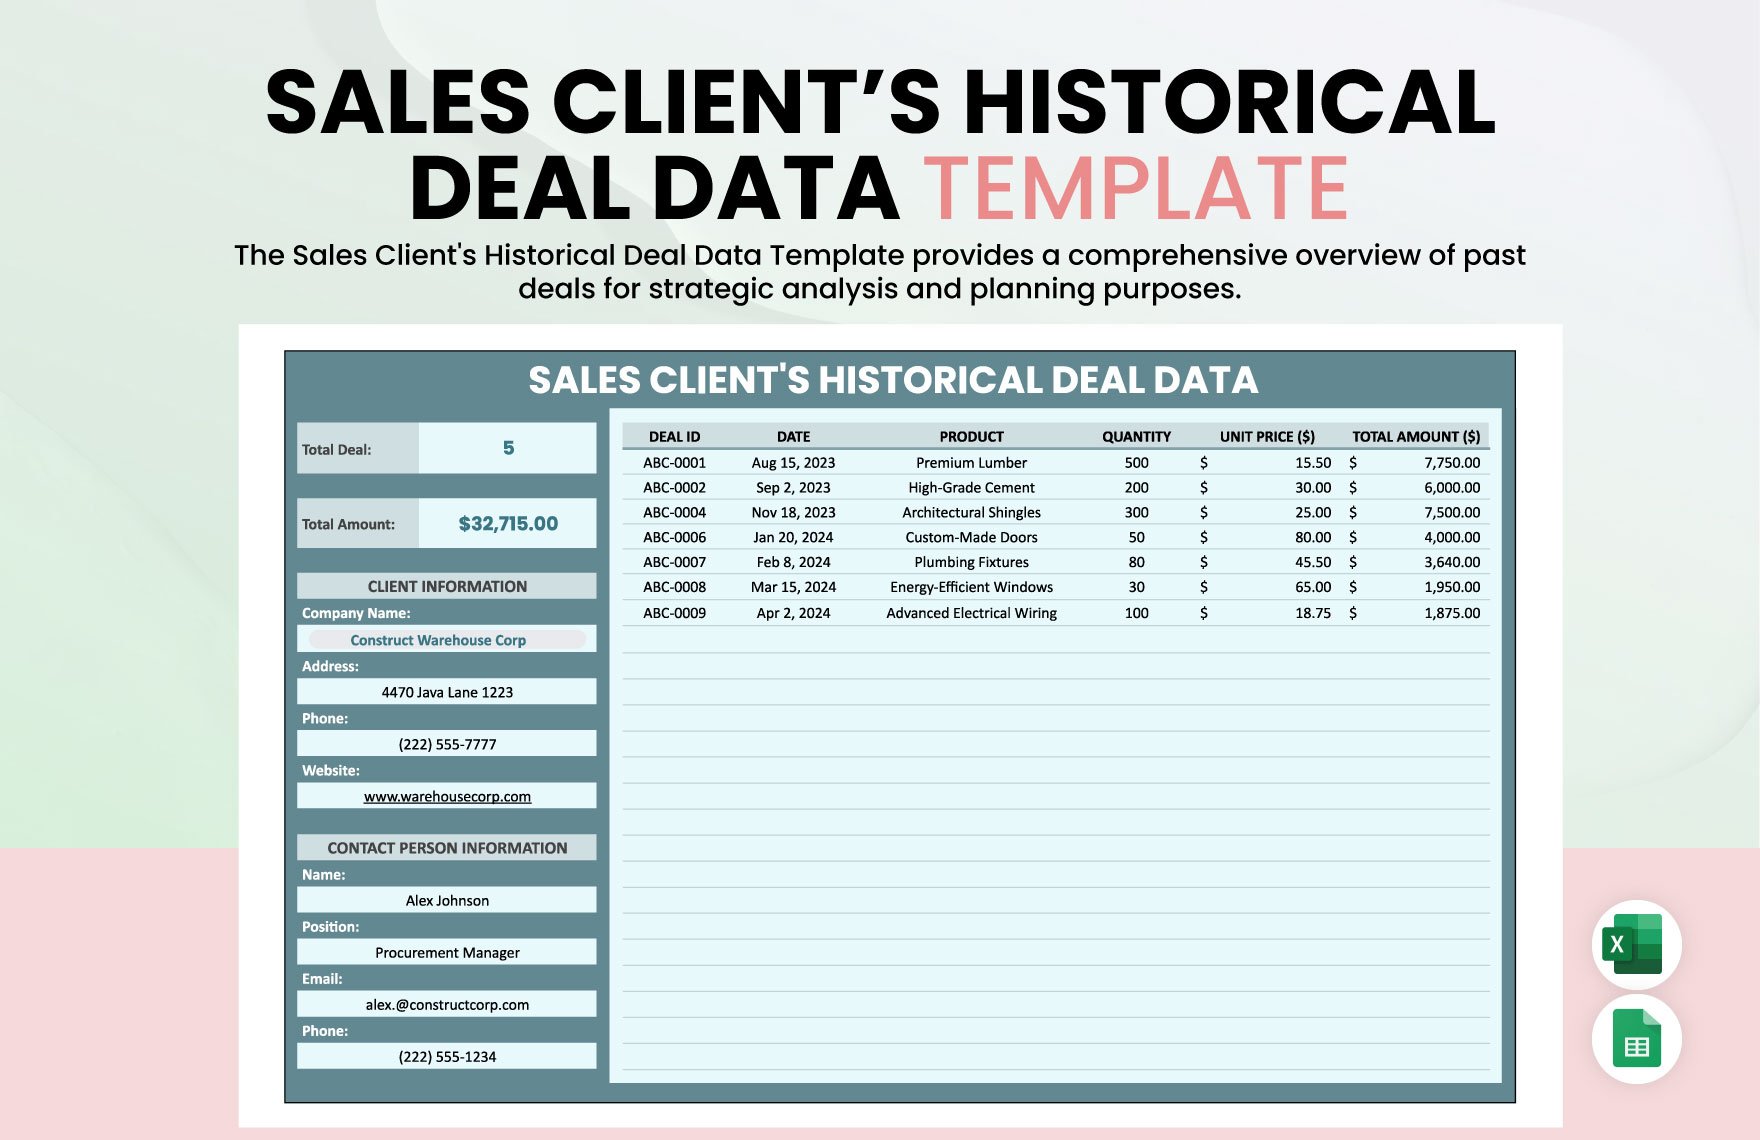 Sales Client's Historical Deal Data Template